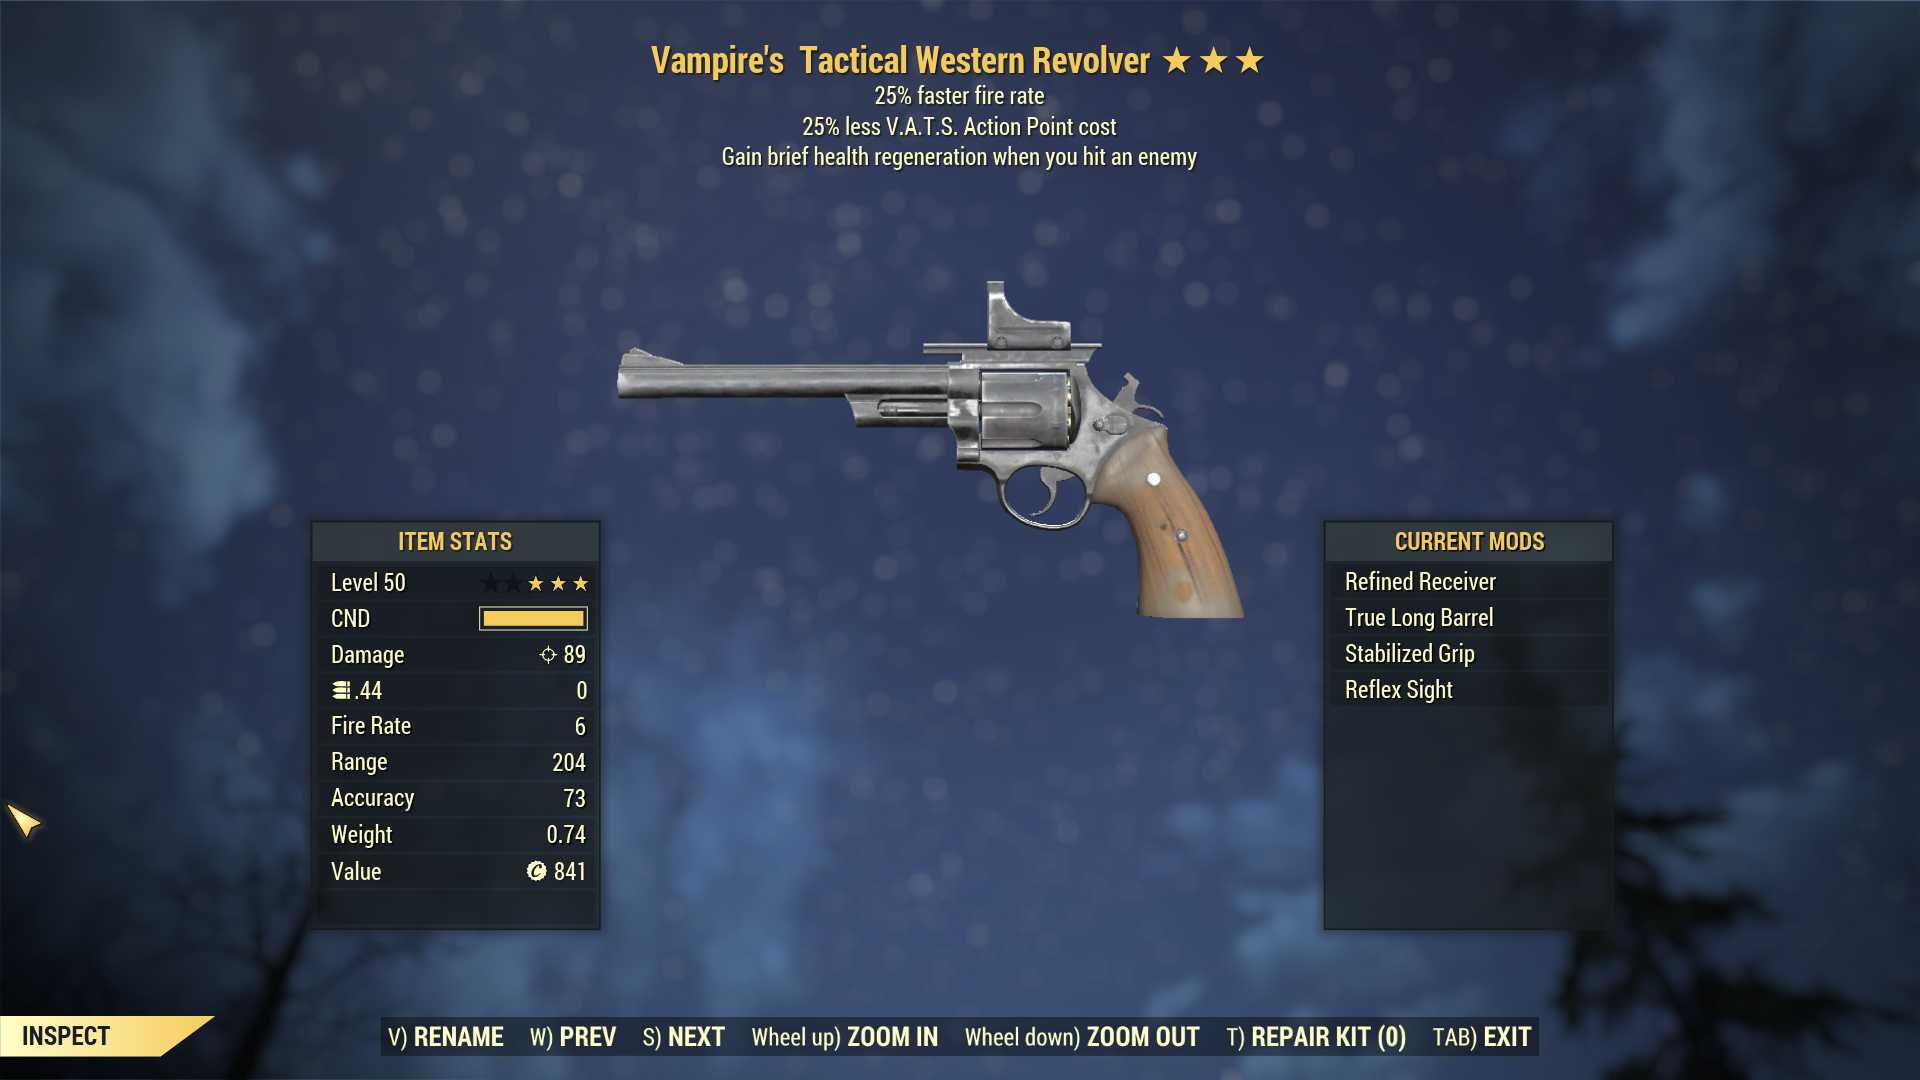 Vampire's Western Revolver (25% faster fire rate, 25% less VATS AP cost)